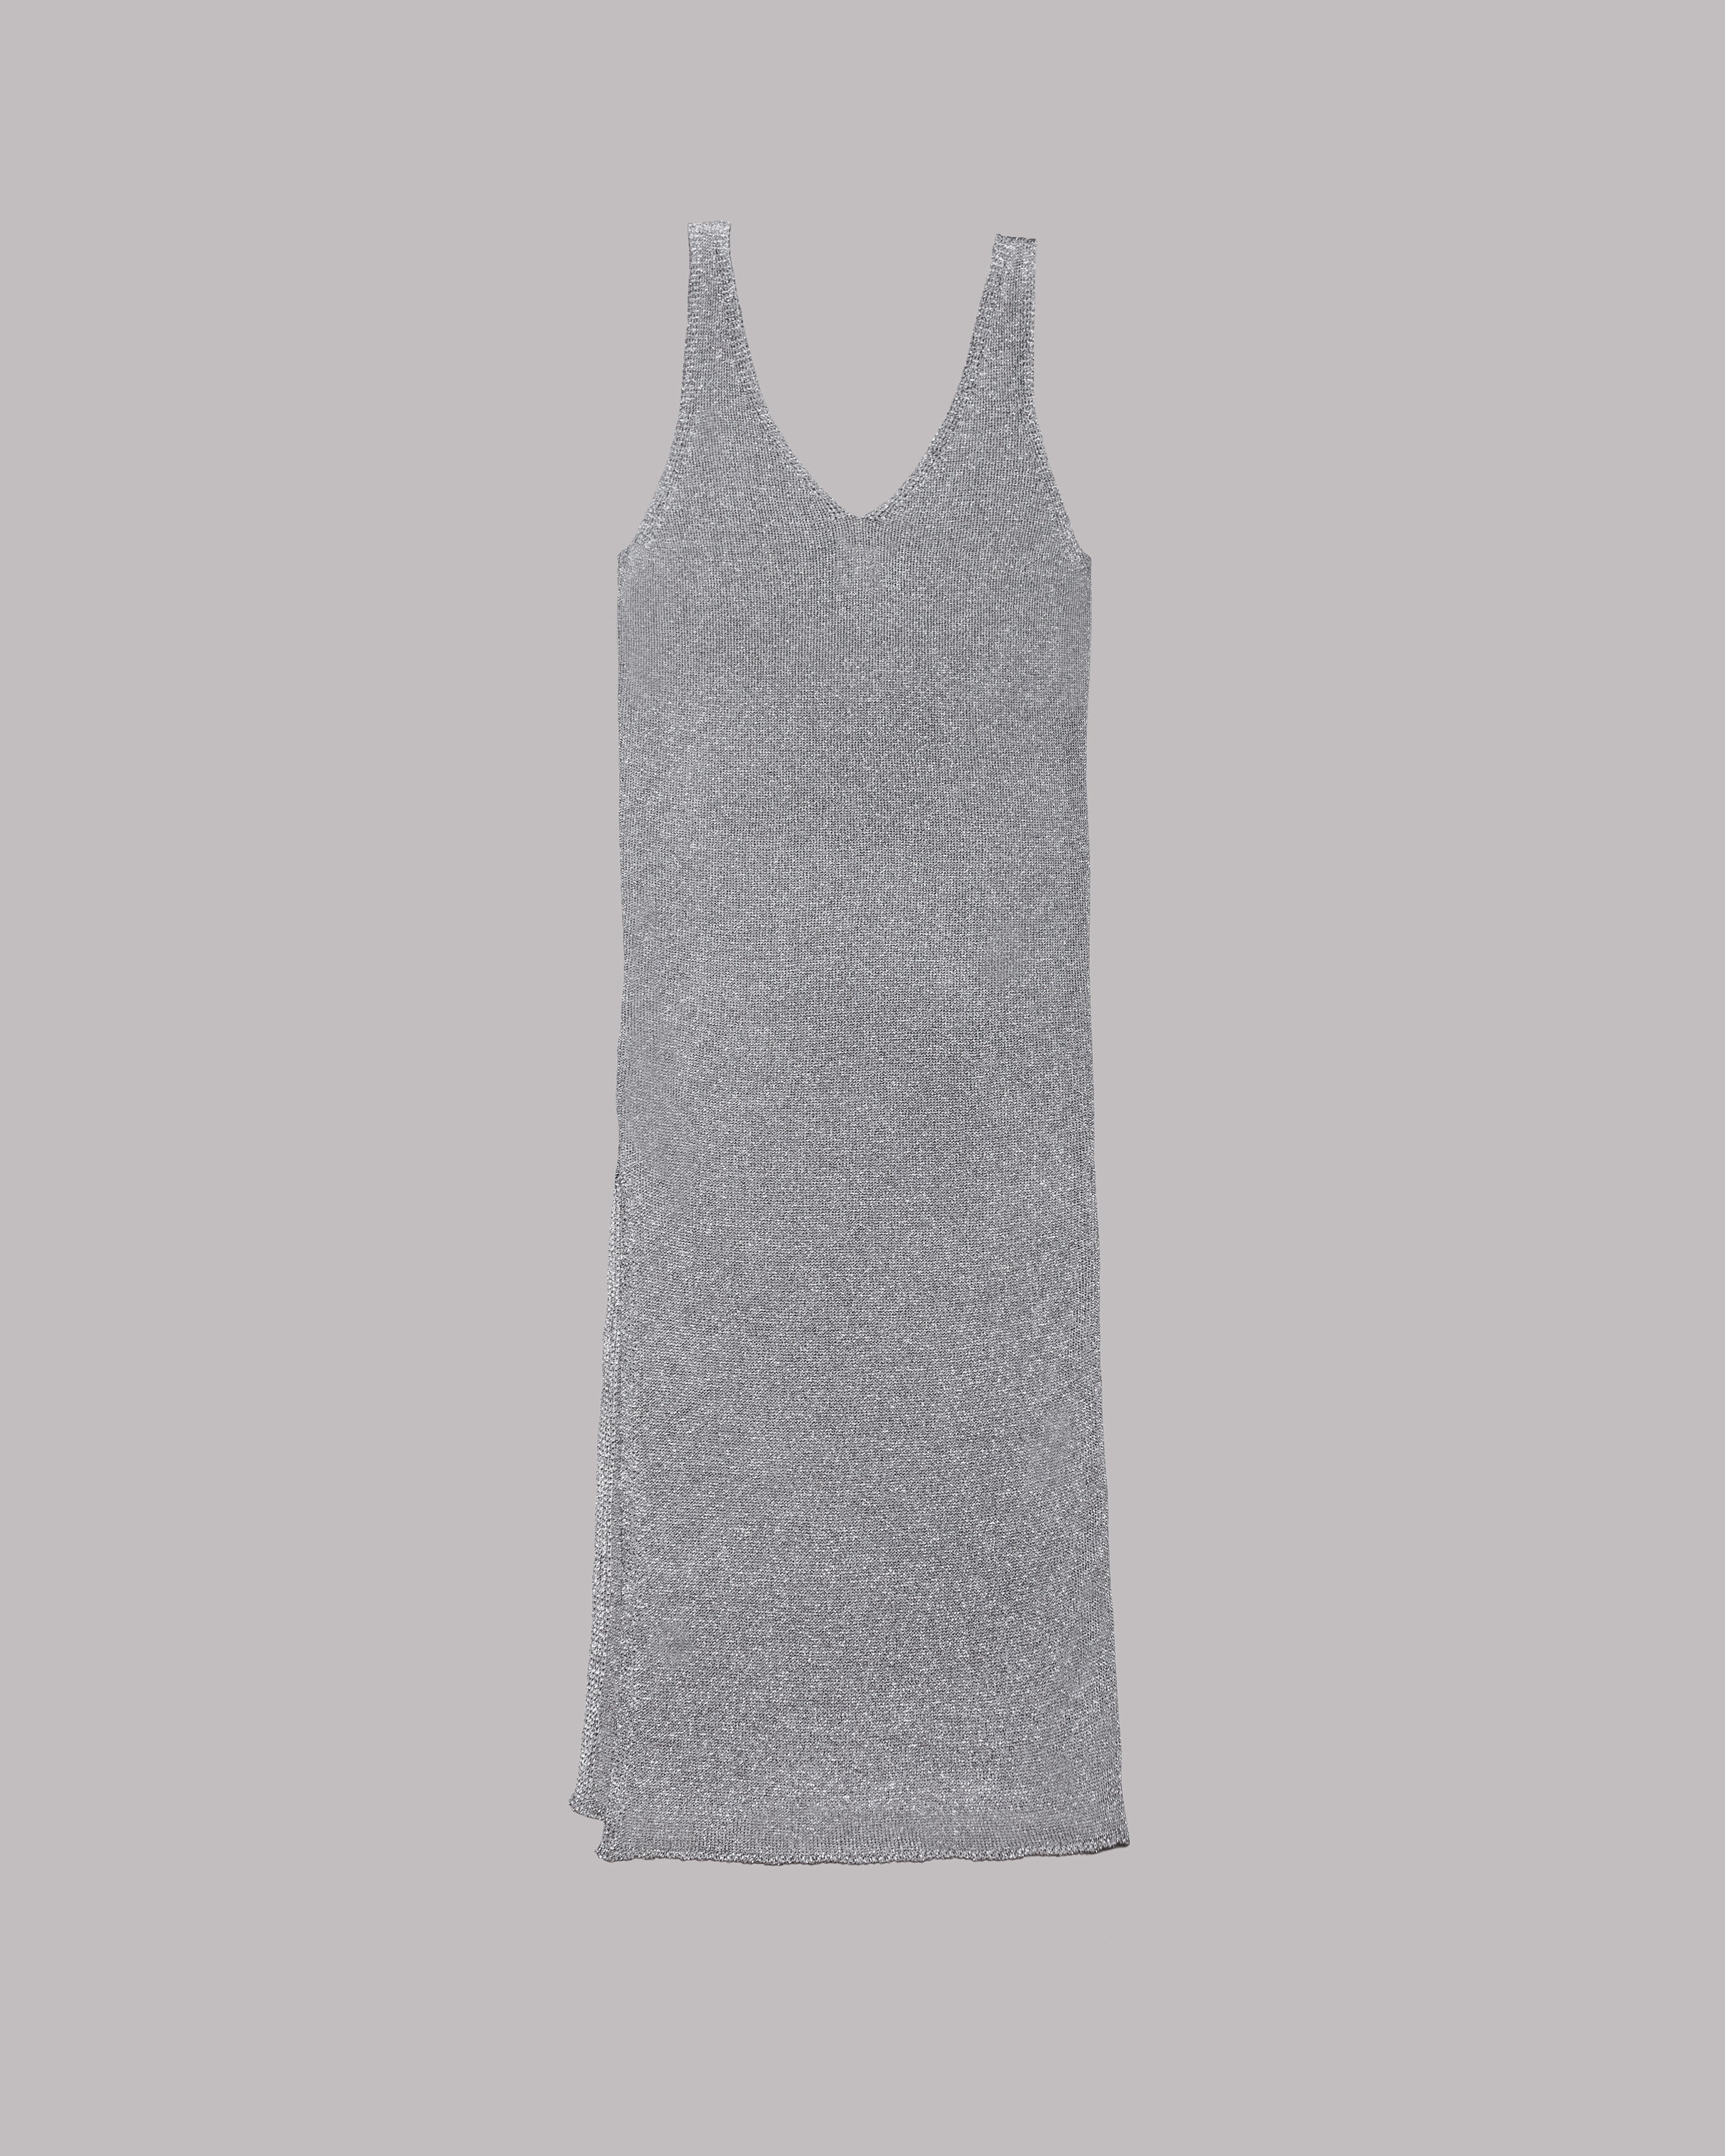 The Silver Sparkly Thin Knit Dress